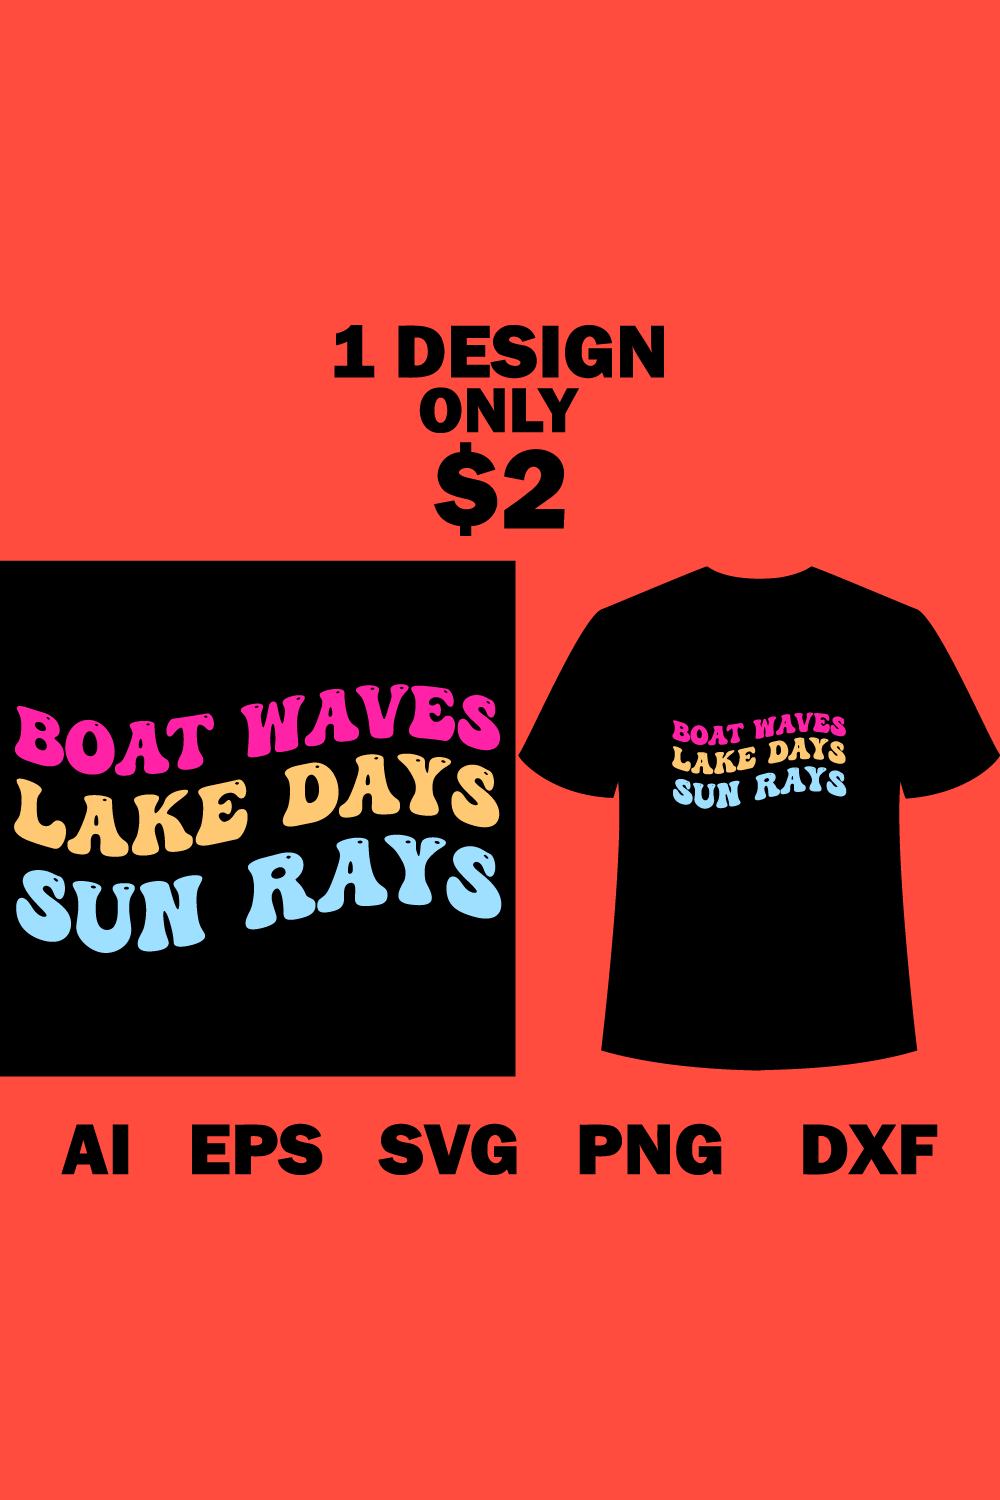 Image of a t-shirt with a charming slogan Boat Waves Lake Days Sun Rays